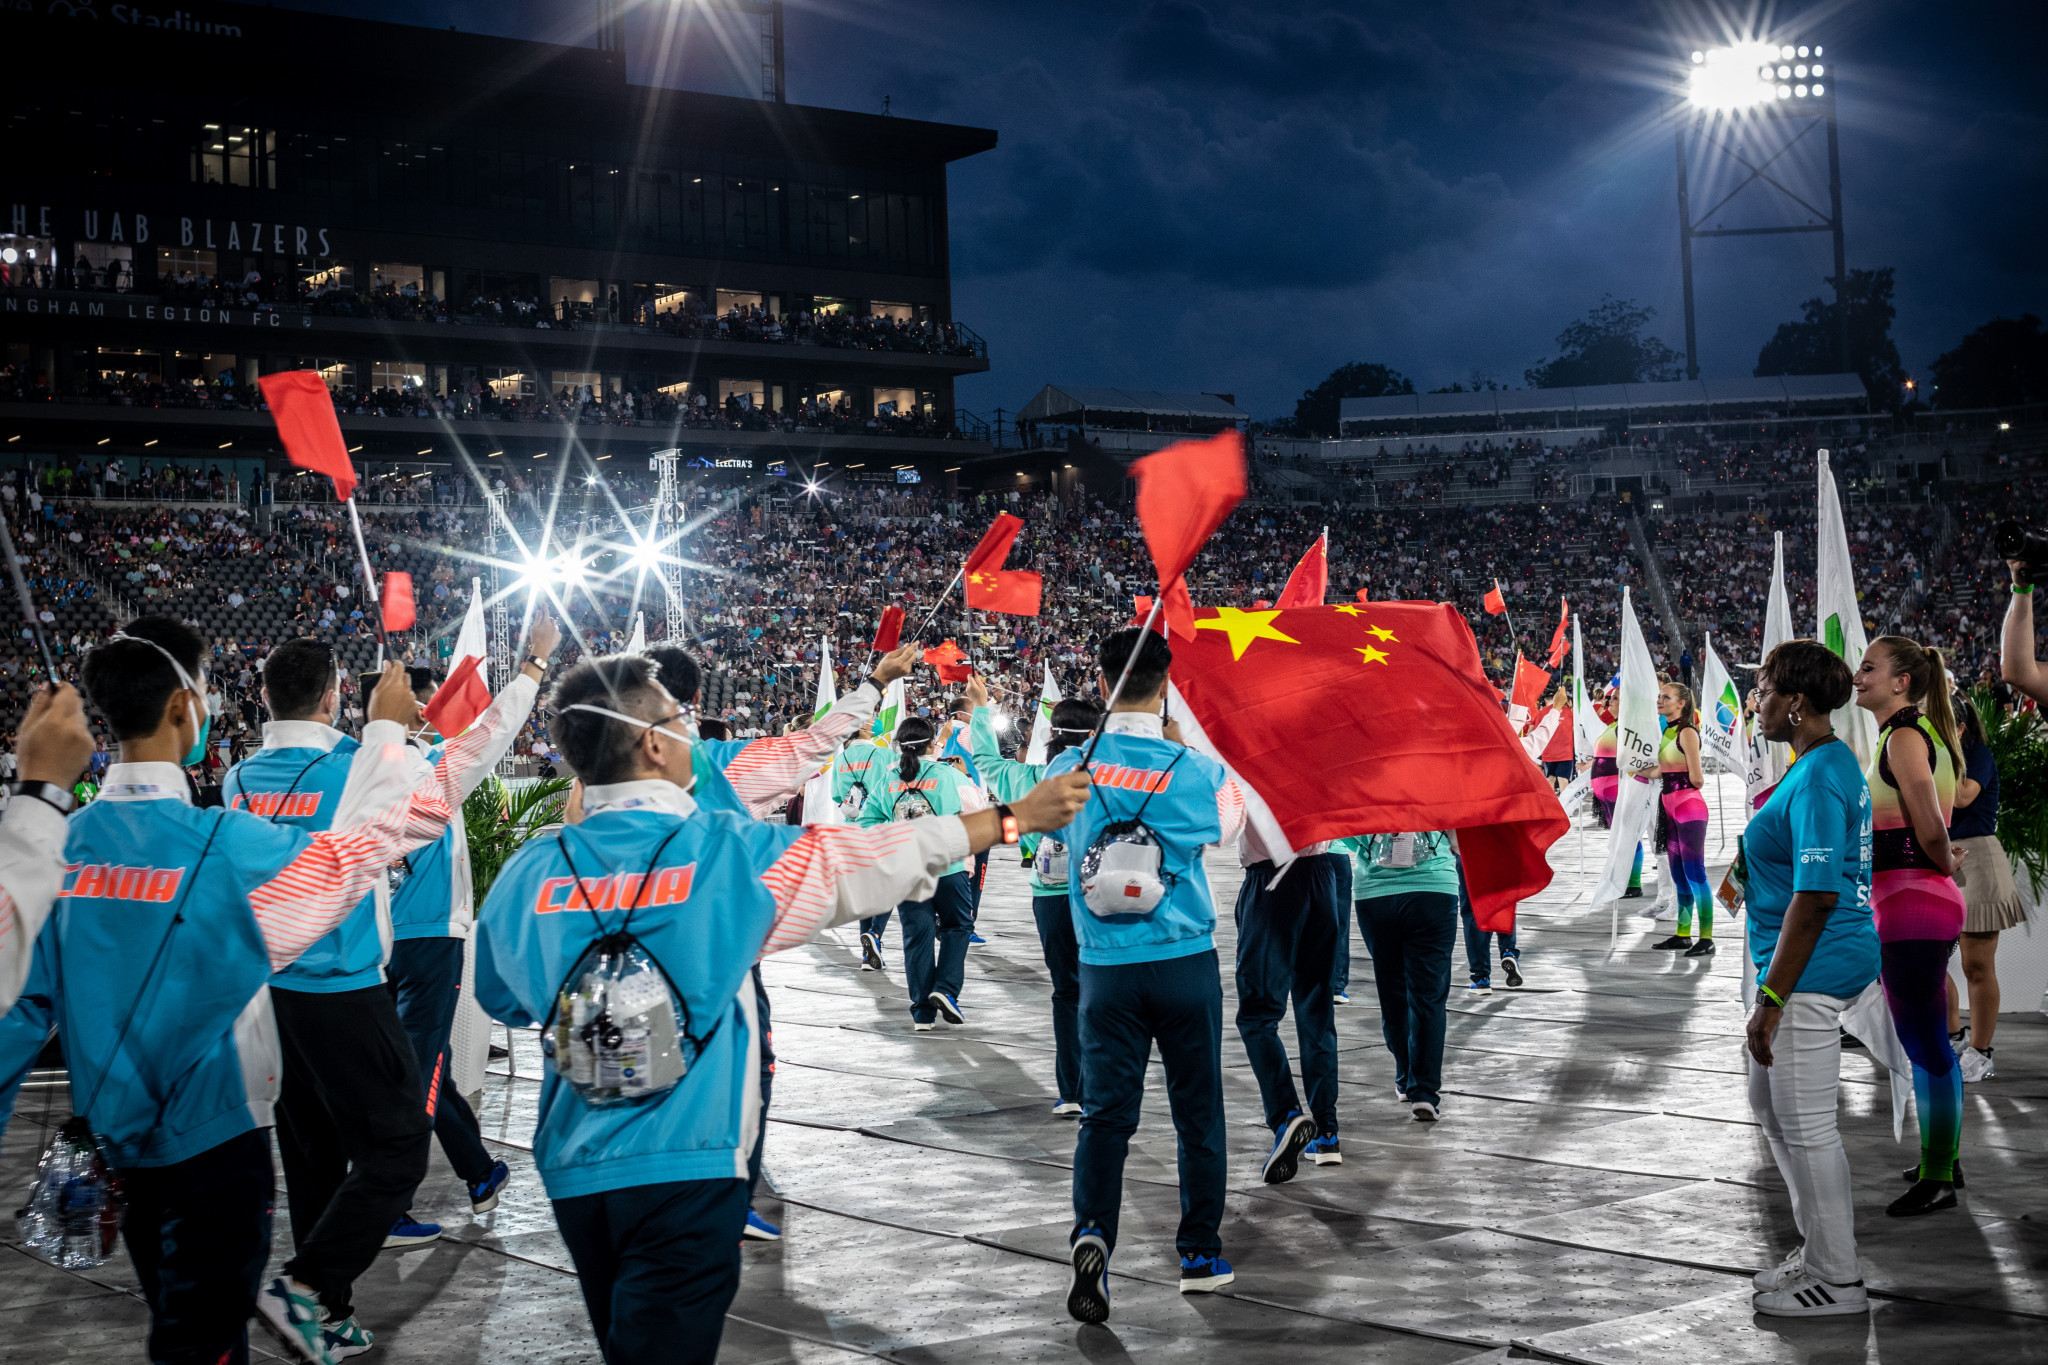 China is set to host the next World Games in Chengdu in 2025 for the first time in its history ©The World Games